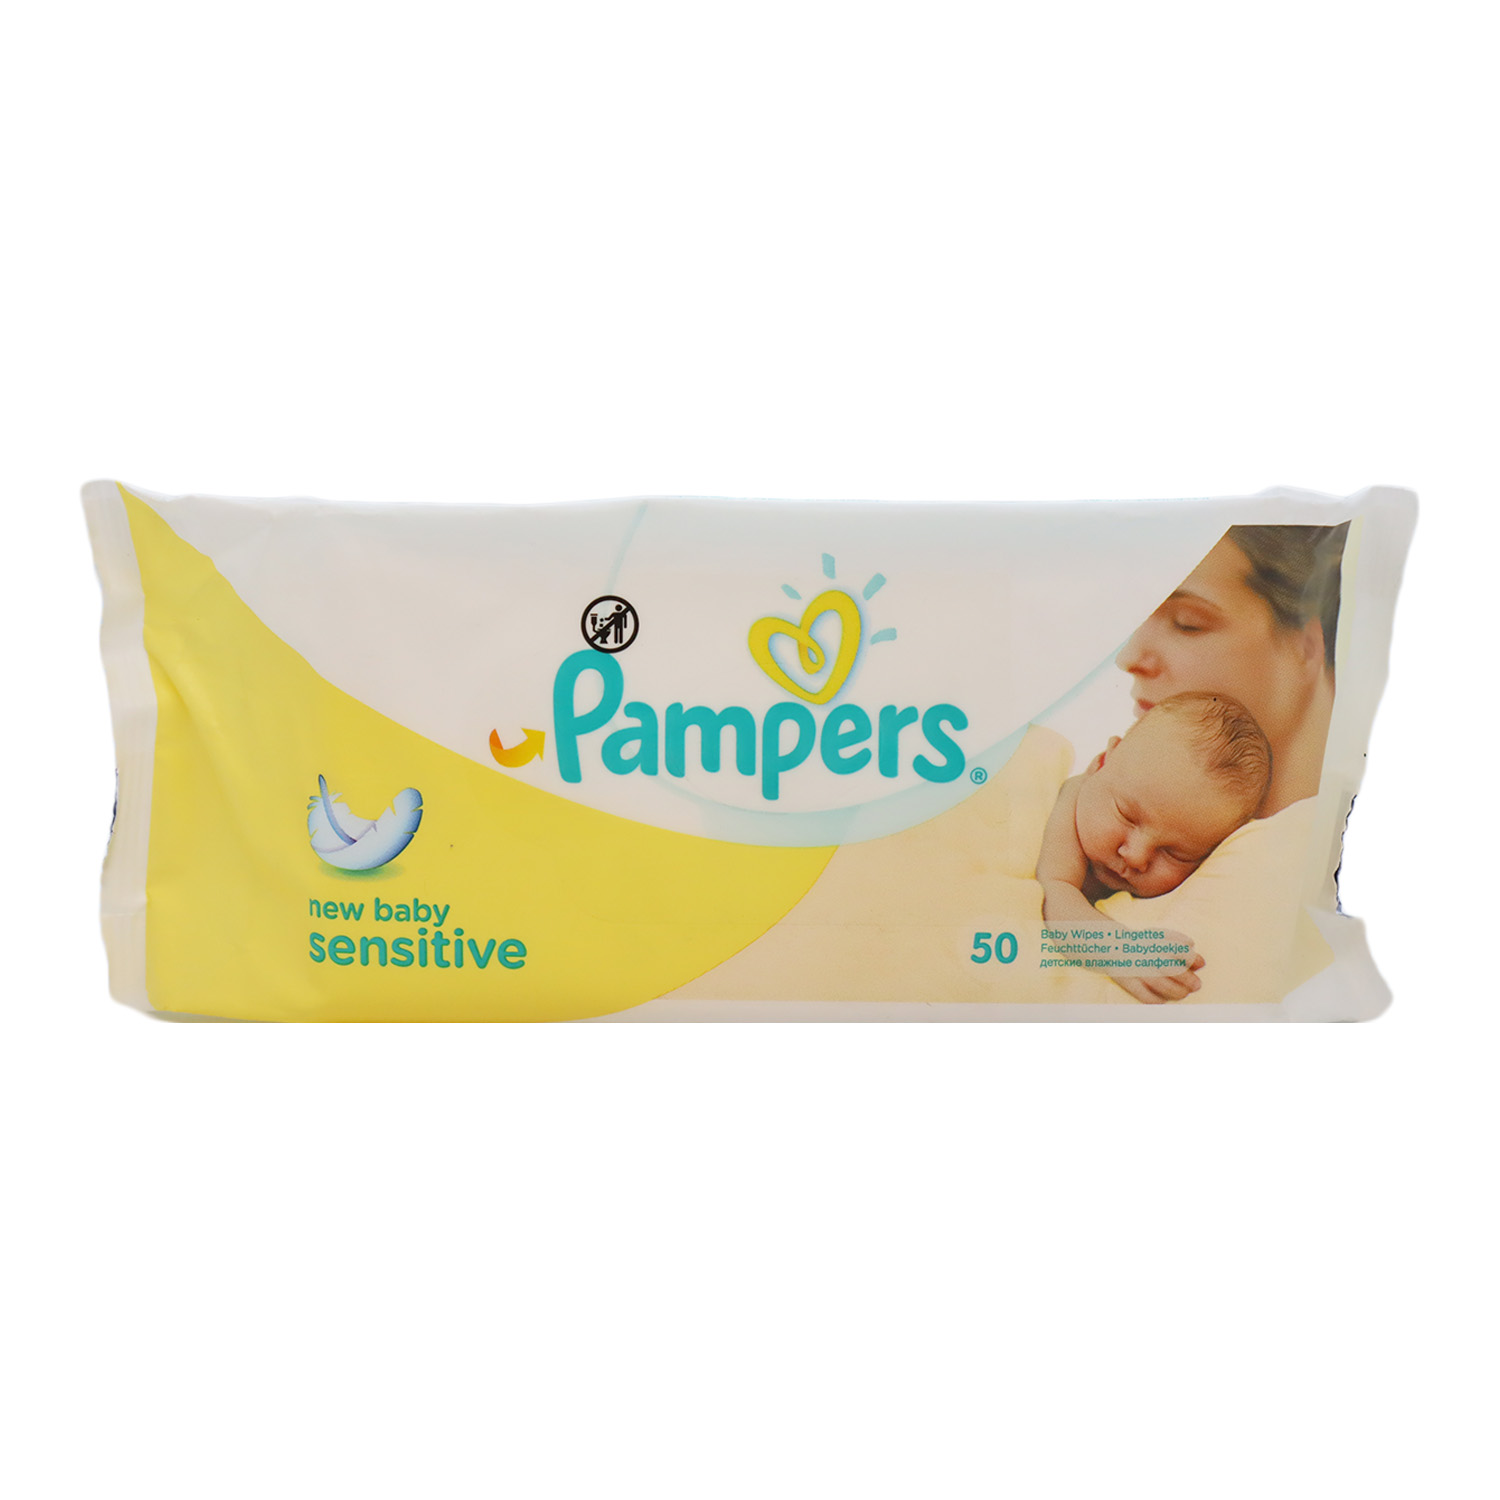 Pampers New Sensitive Baby Wipes 50 Pcs